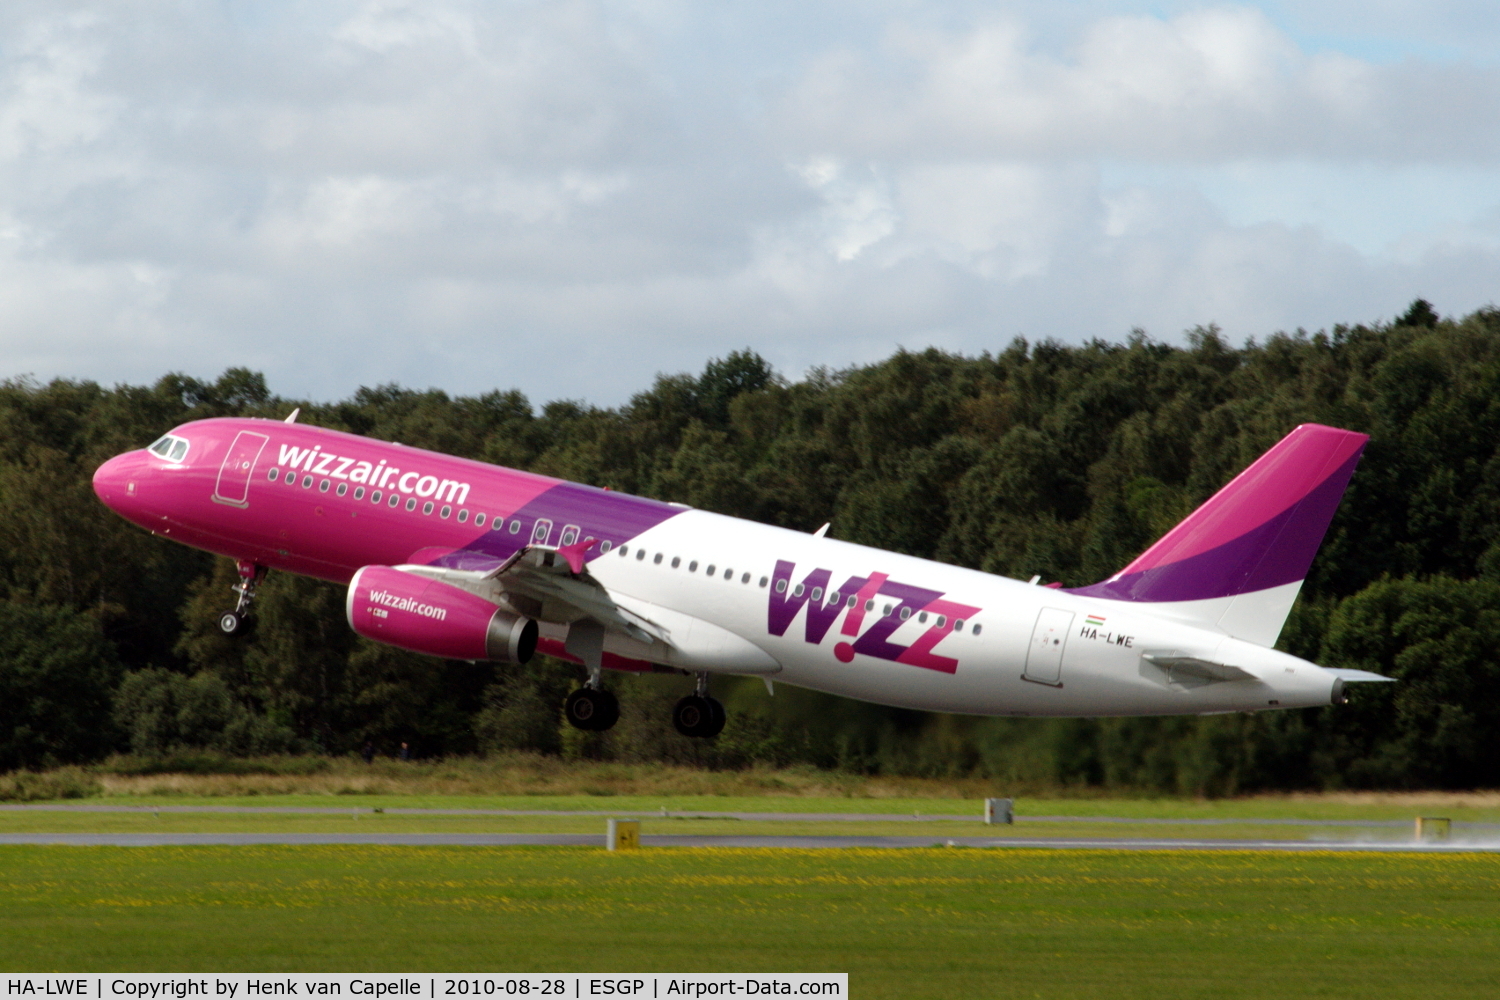 HA-LWE, 2010 Airbus A320-232 C/N 4372, Airbus A320 of Wizz Air taking off from Göteborg Säve airport, Sweden.